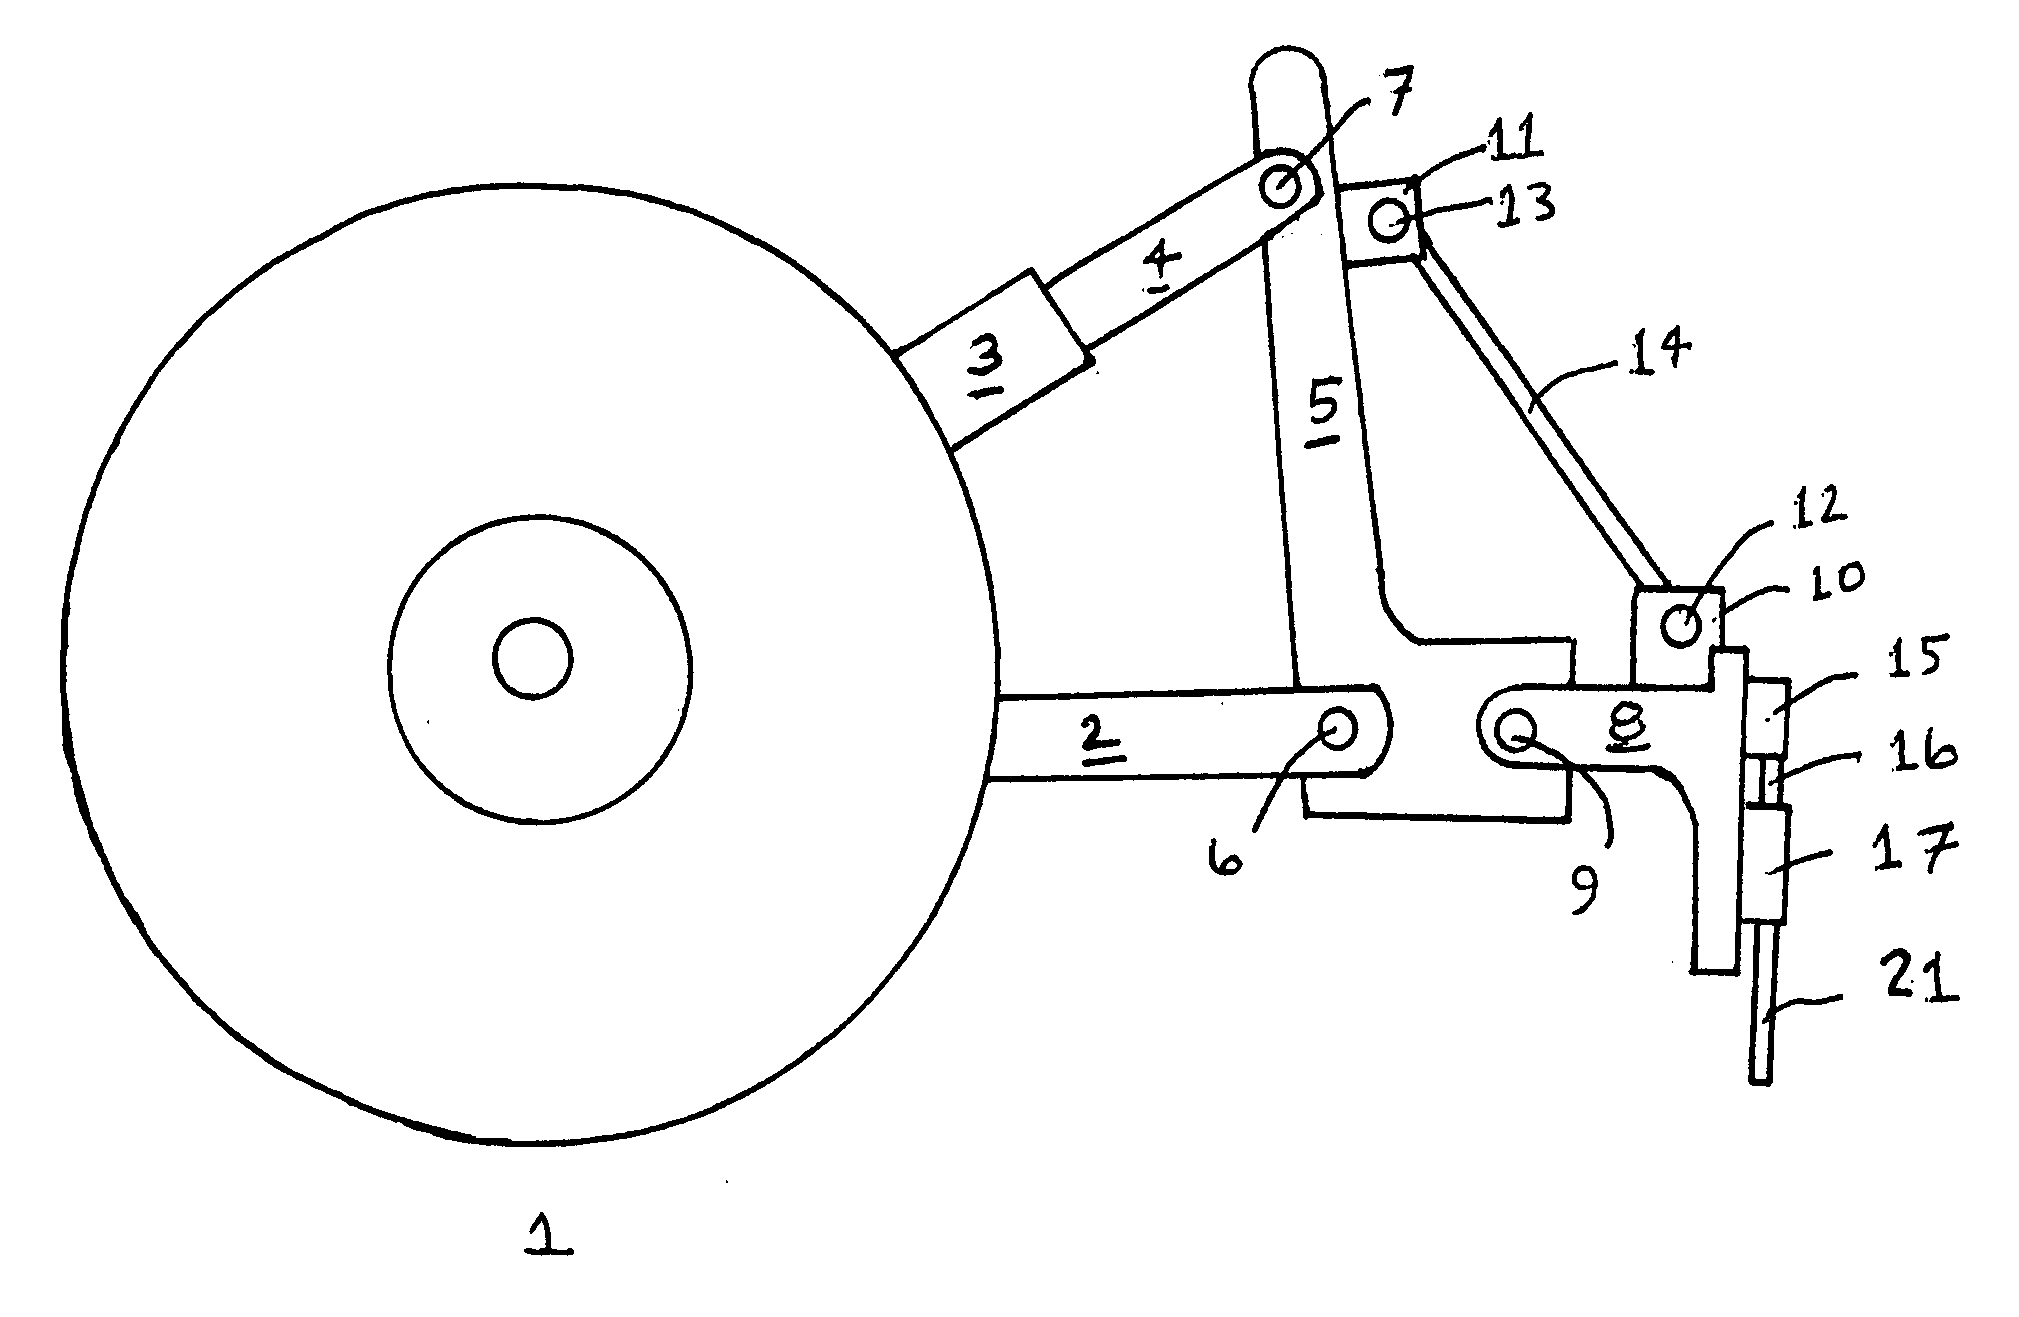 Grapple apparatus for a three point hitch